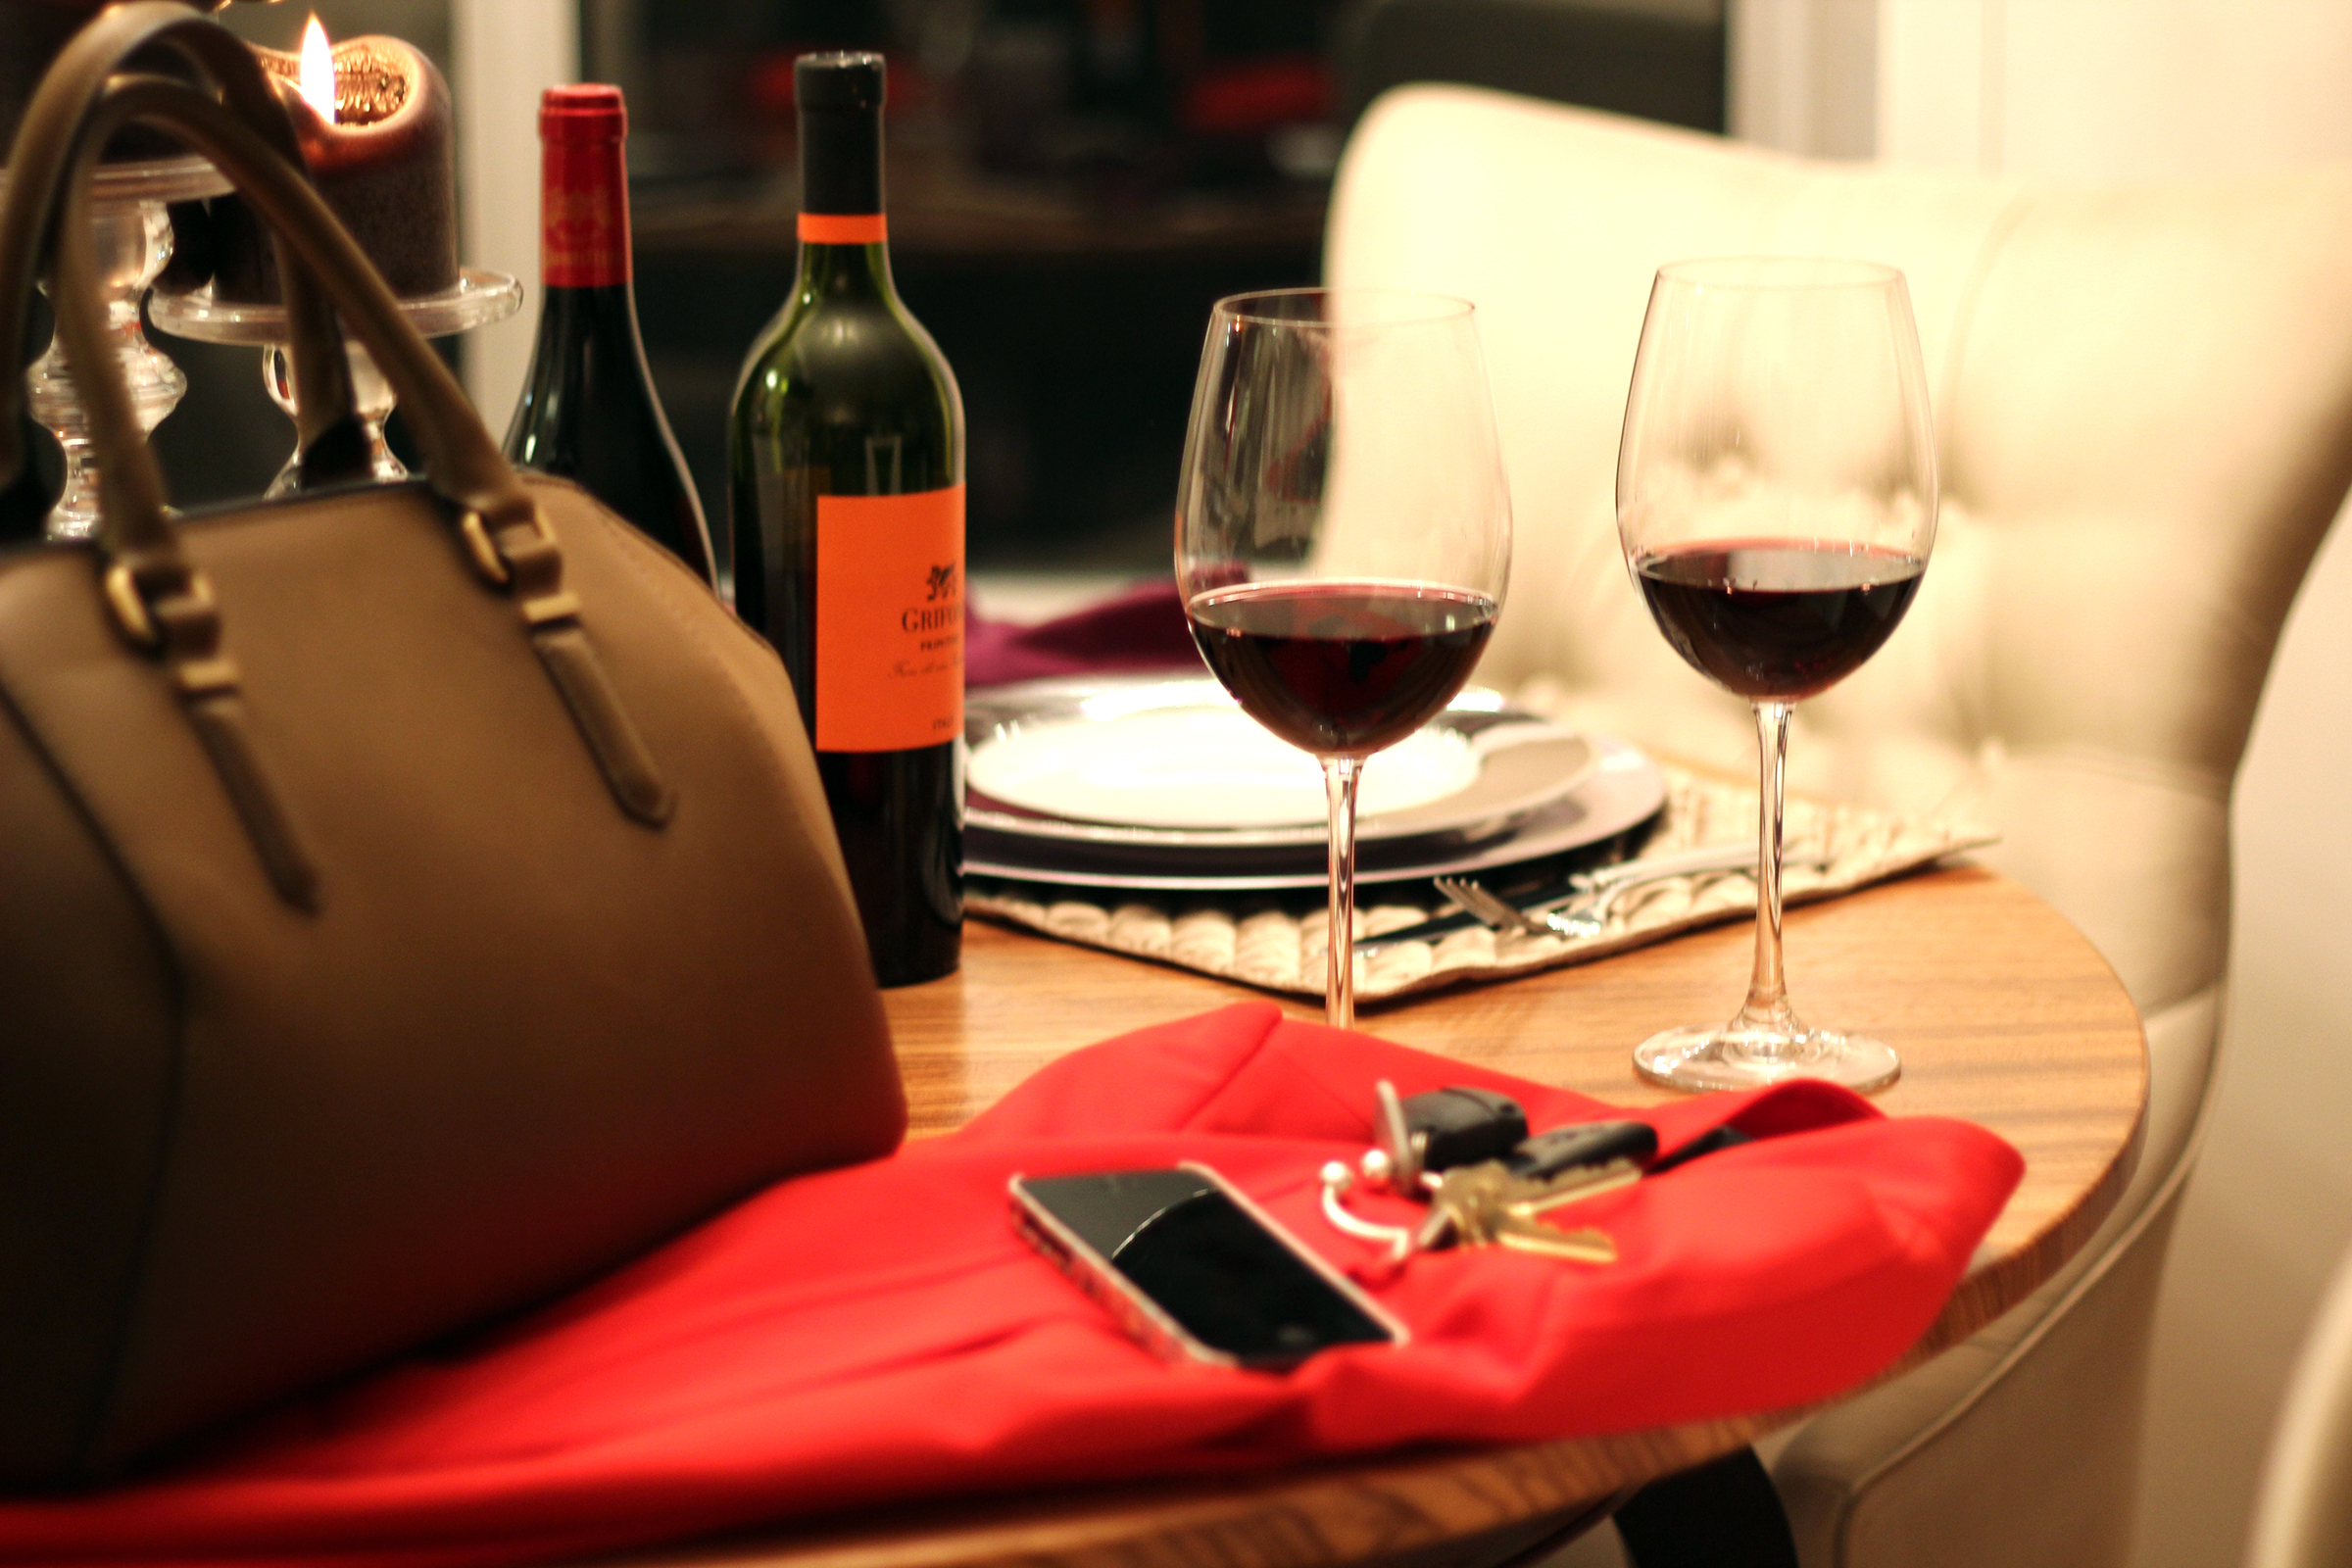 home dinner date: what to wear featured by popular San Francisco style blogger, Just Add Glam